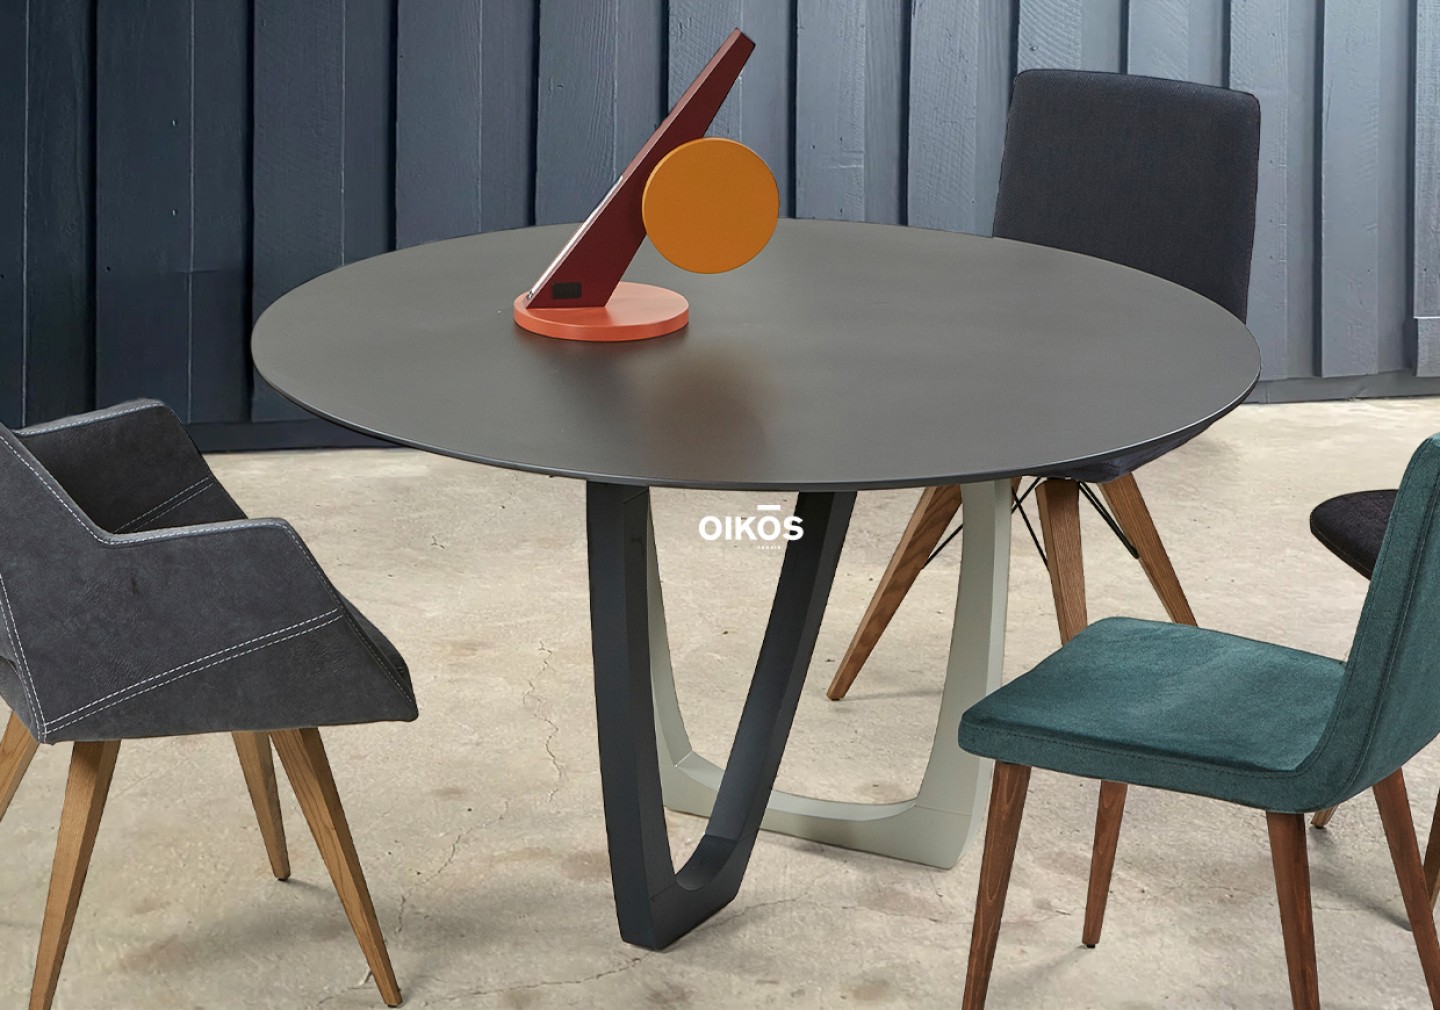 THE ORION DINNER TABLE